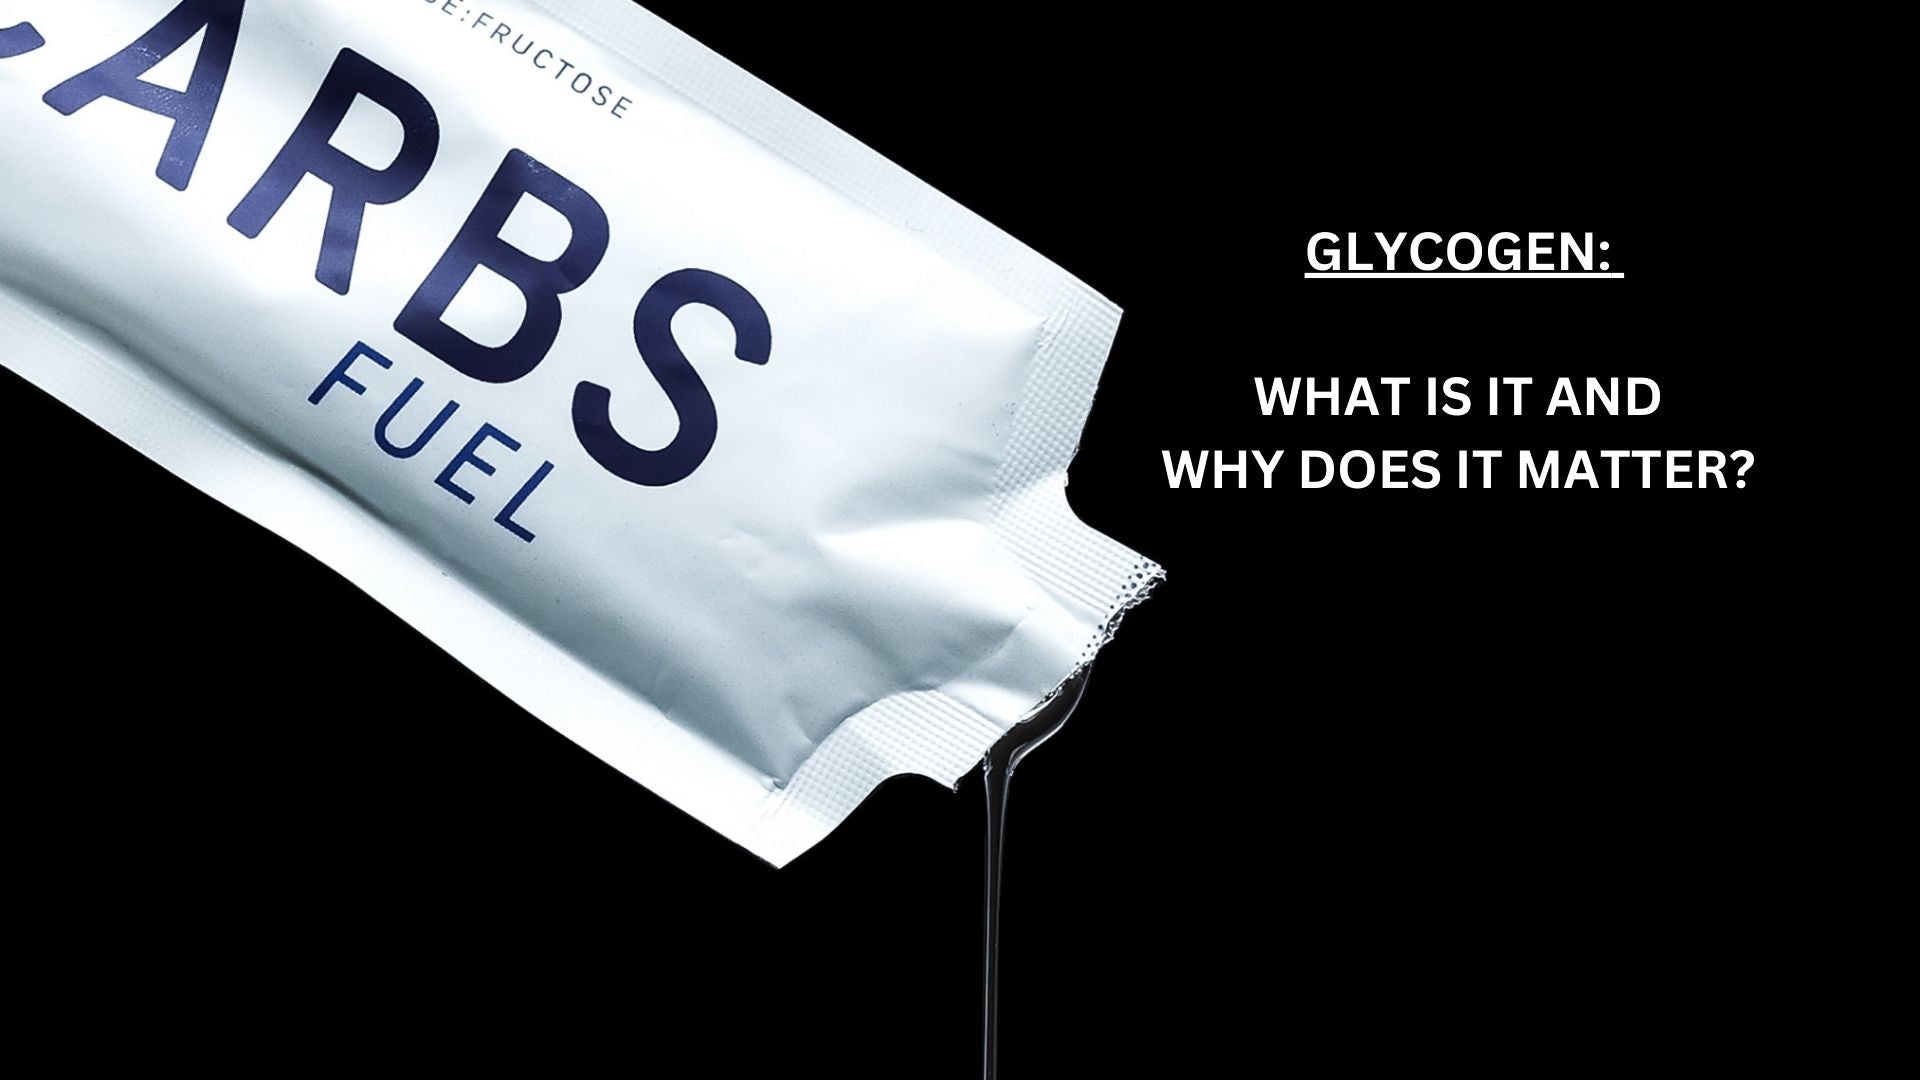 An Introduction to Glycogen: Our Body’s Natural Carbohydrate Reservoir